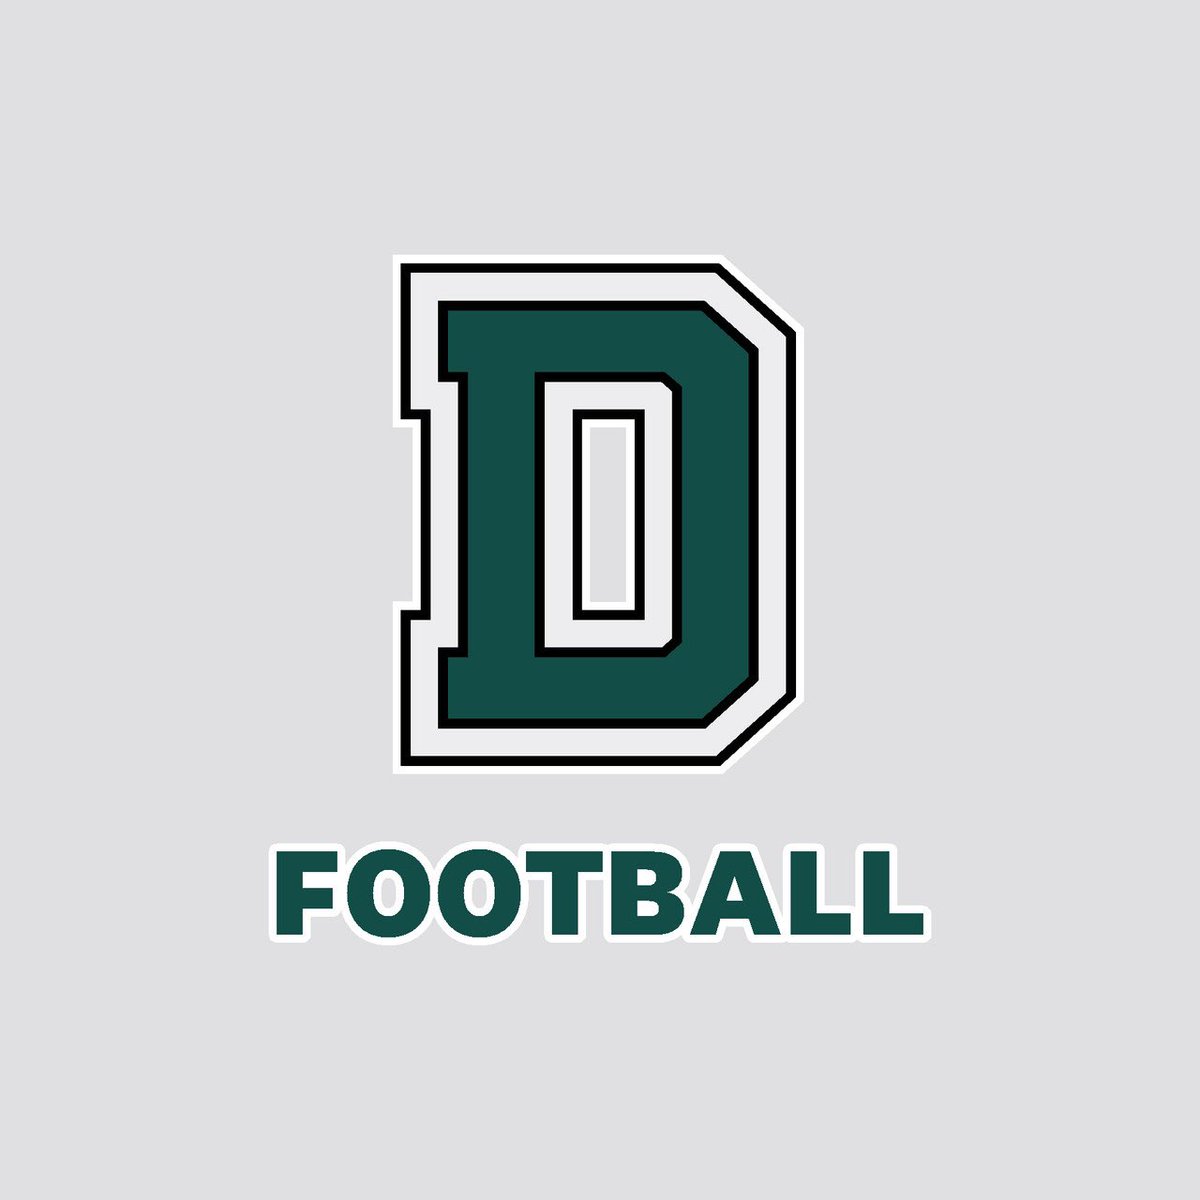 After a great conversation with @coachkeithclark I am blessed to receive my first Division 1 offer from Dartmouth! @ExeterTwpFB